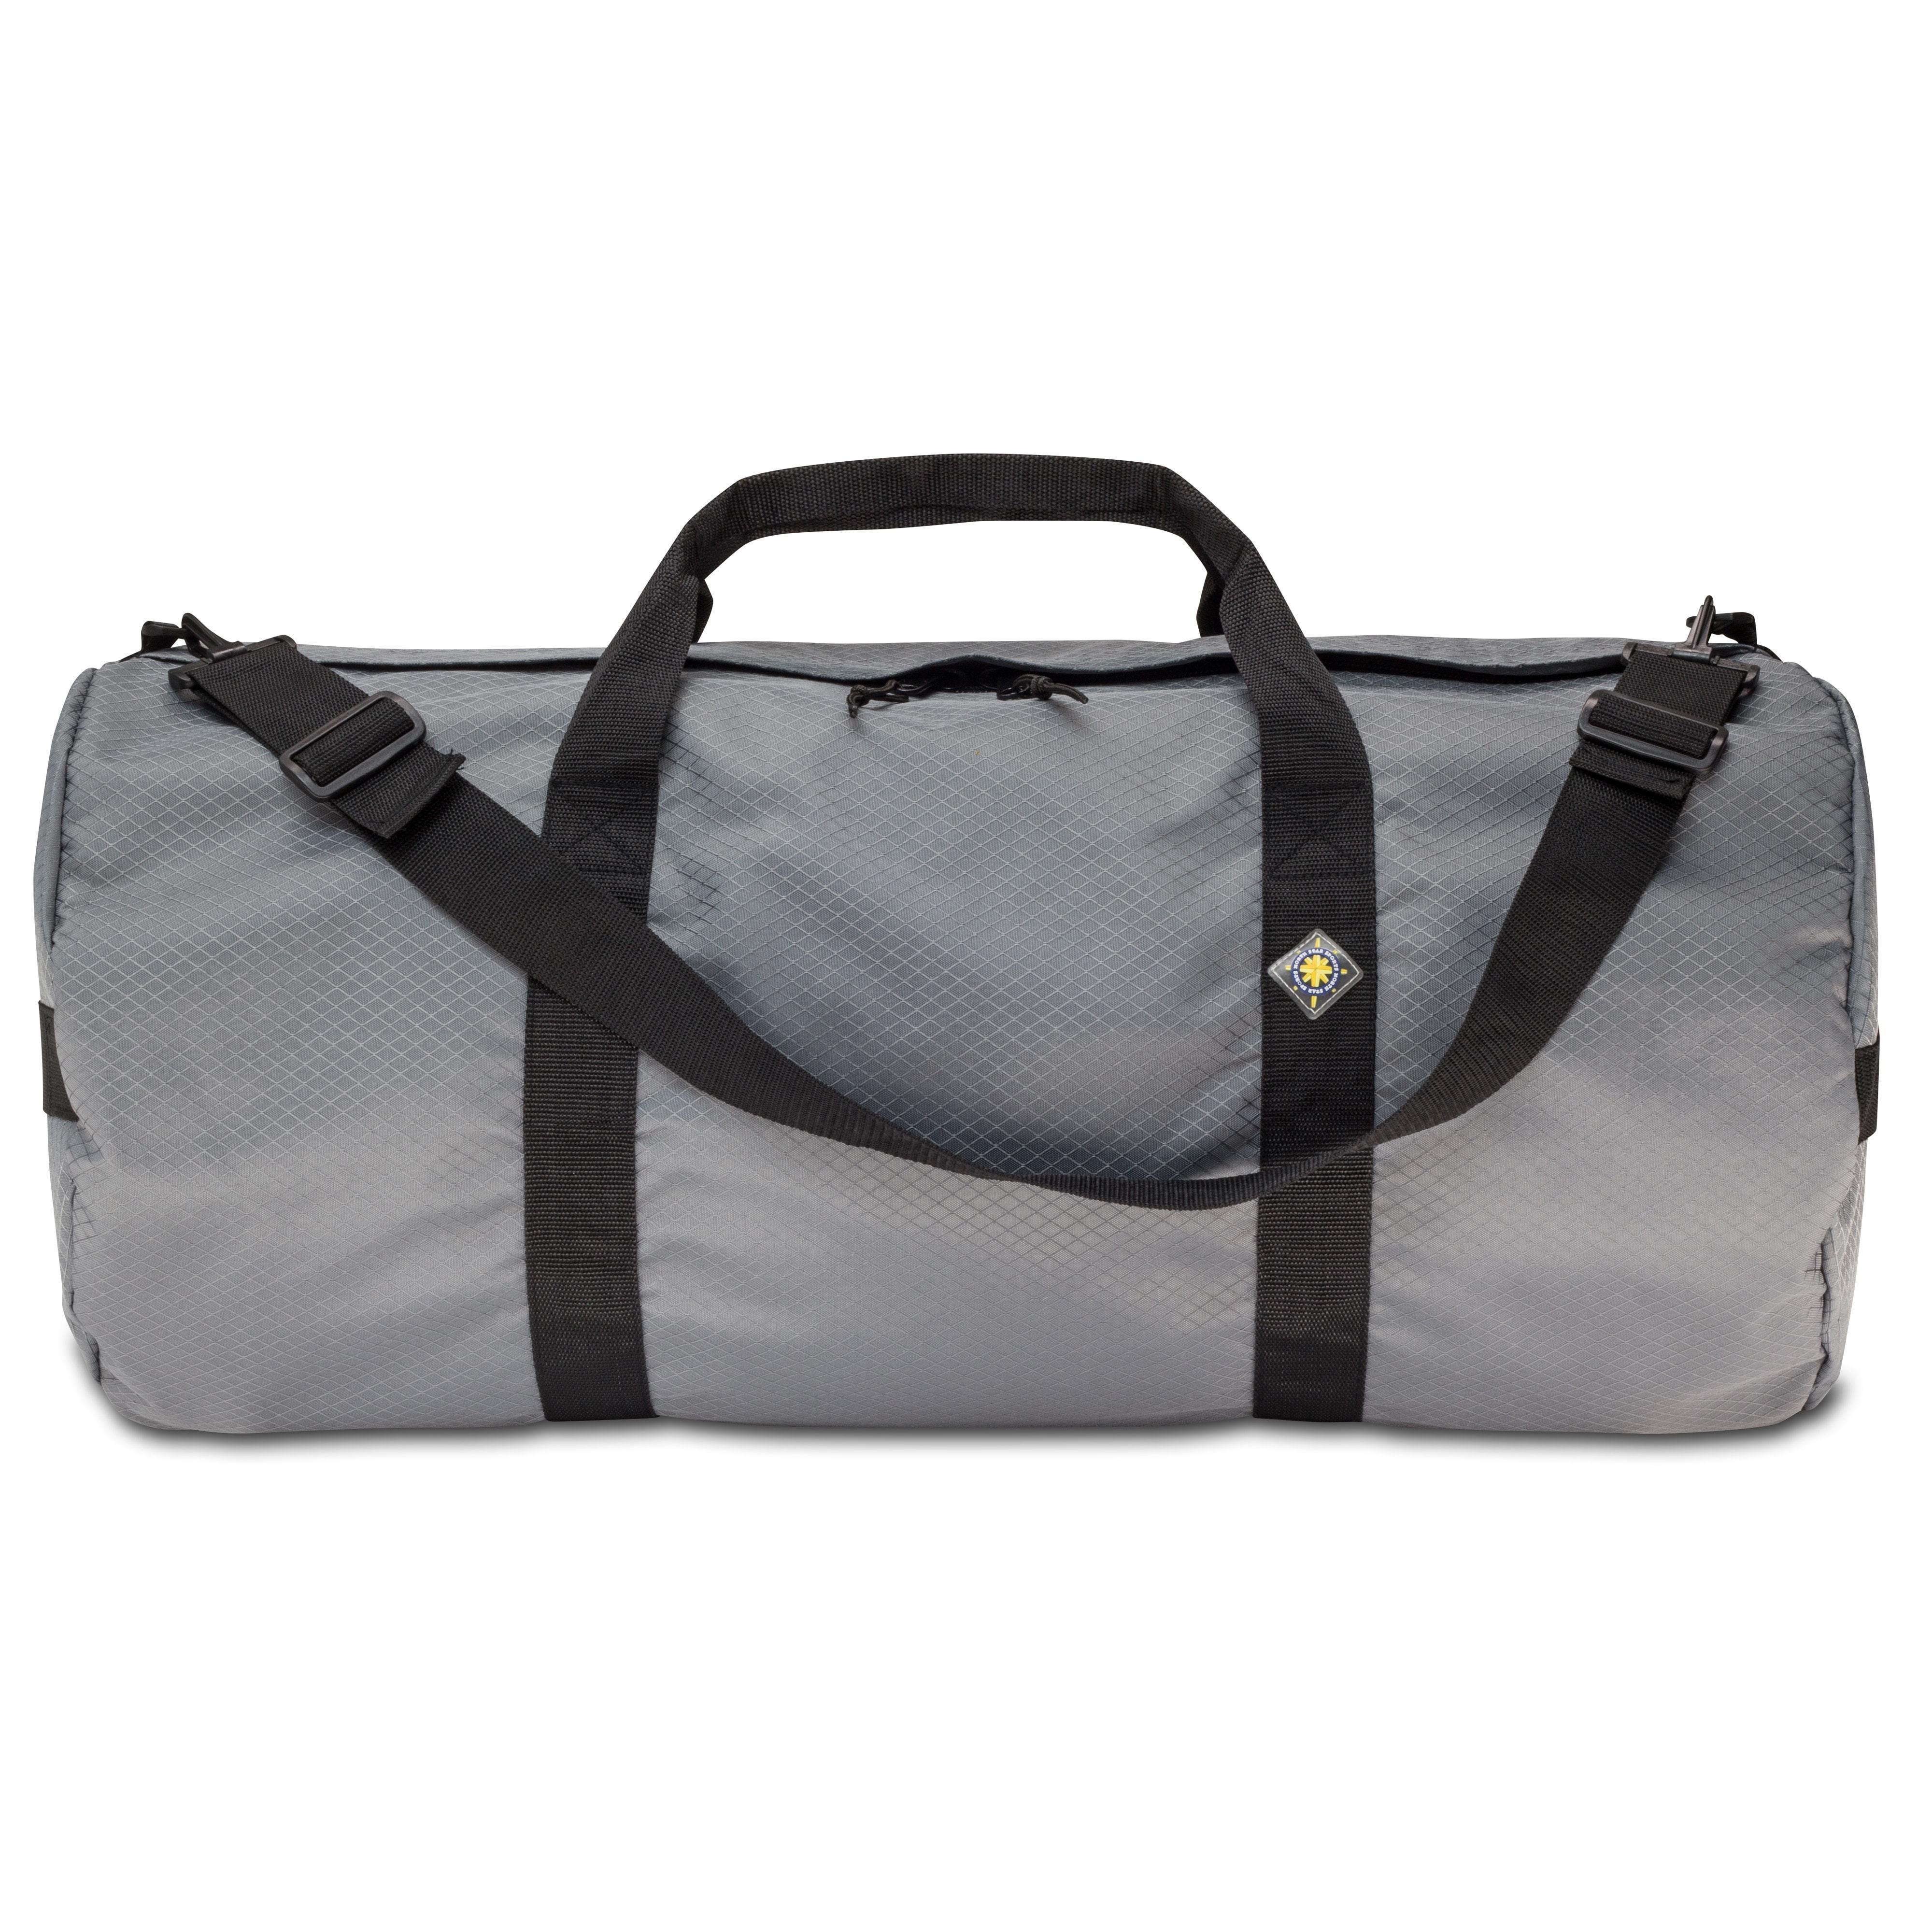 Studio photo the Steel Grey SD1430DLX Standard Duffle by Northstar Bags. 75 liter duffel with diamond ripstop fabric, thick webbing straps, and a large format metal zipper. Guaranteed for life.